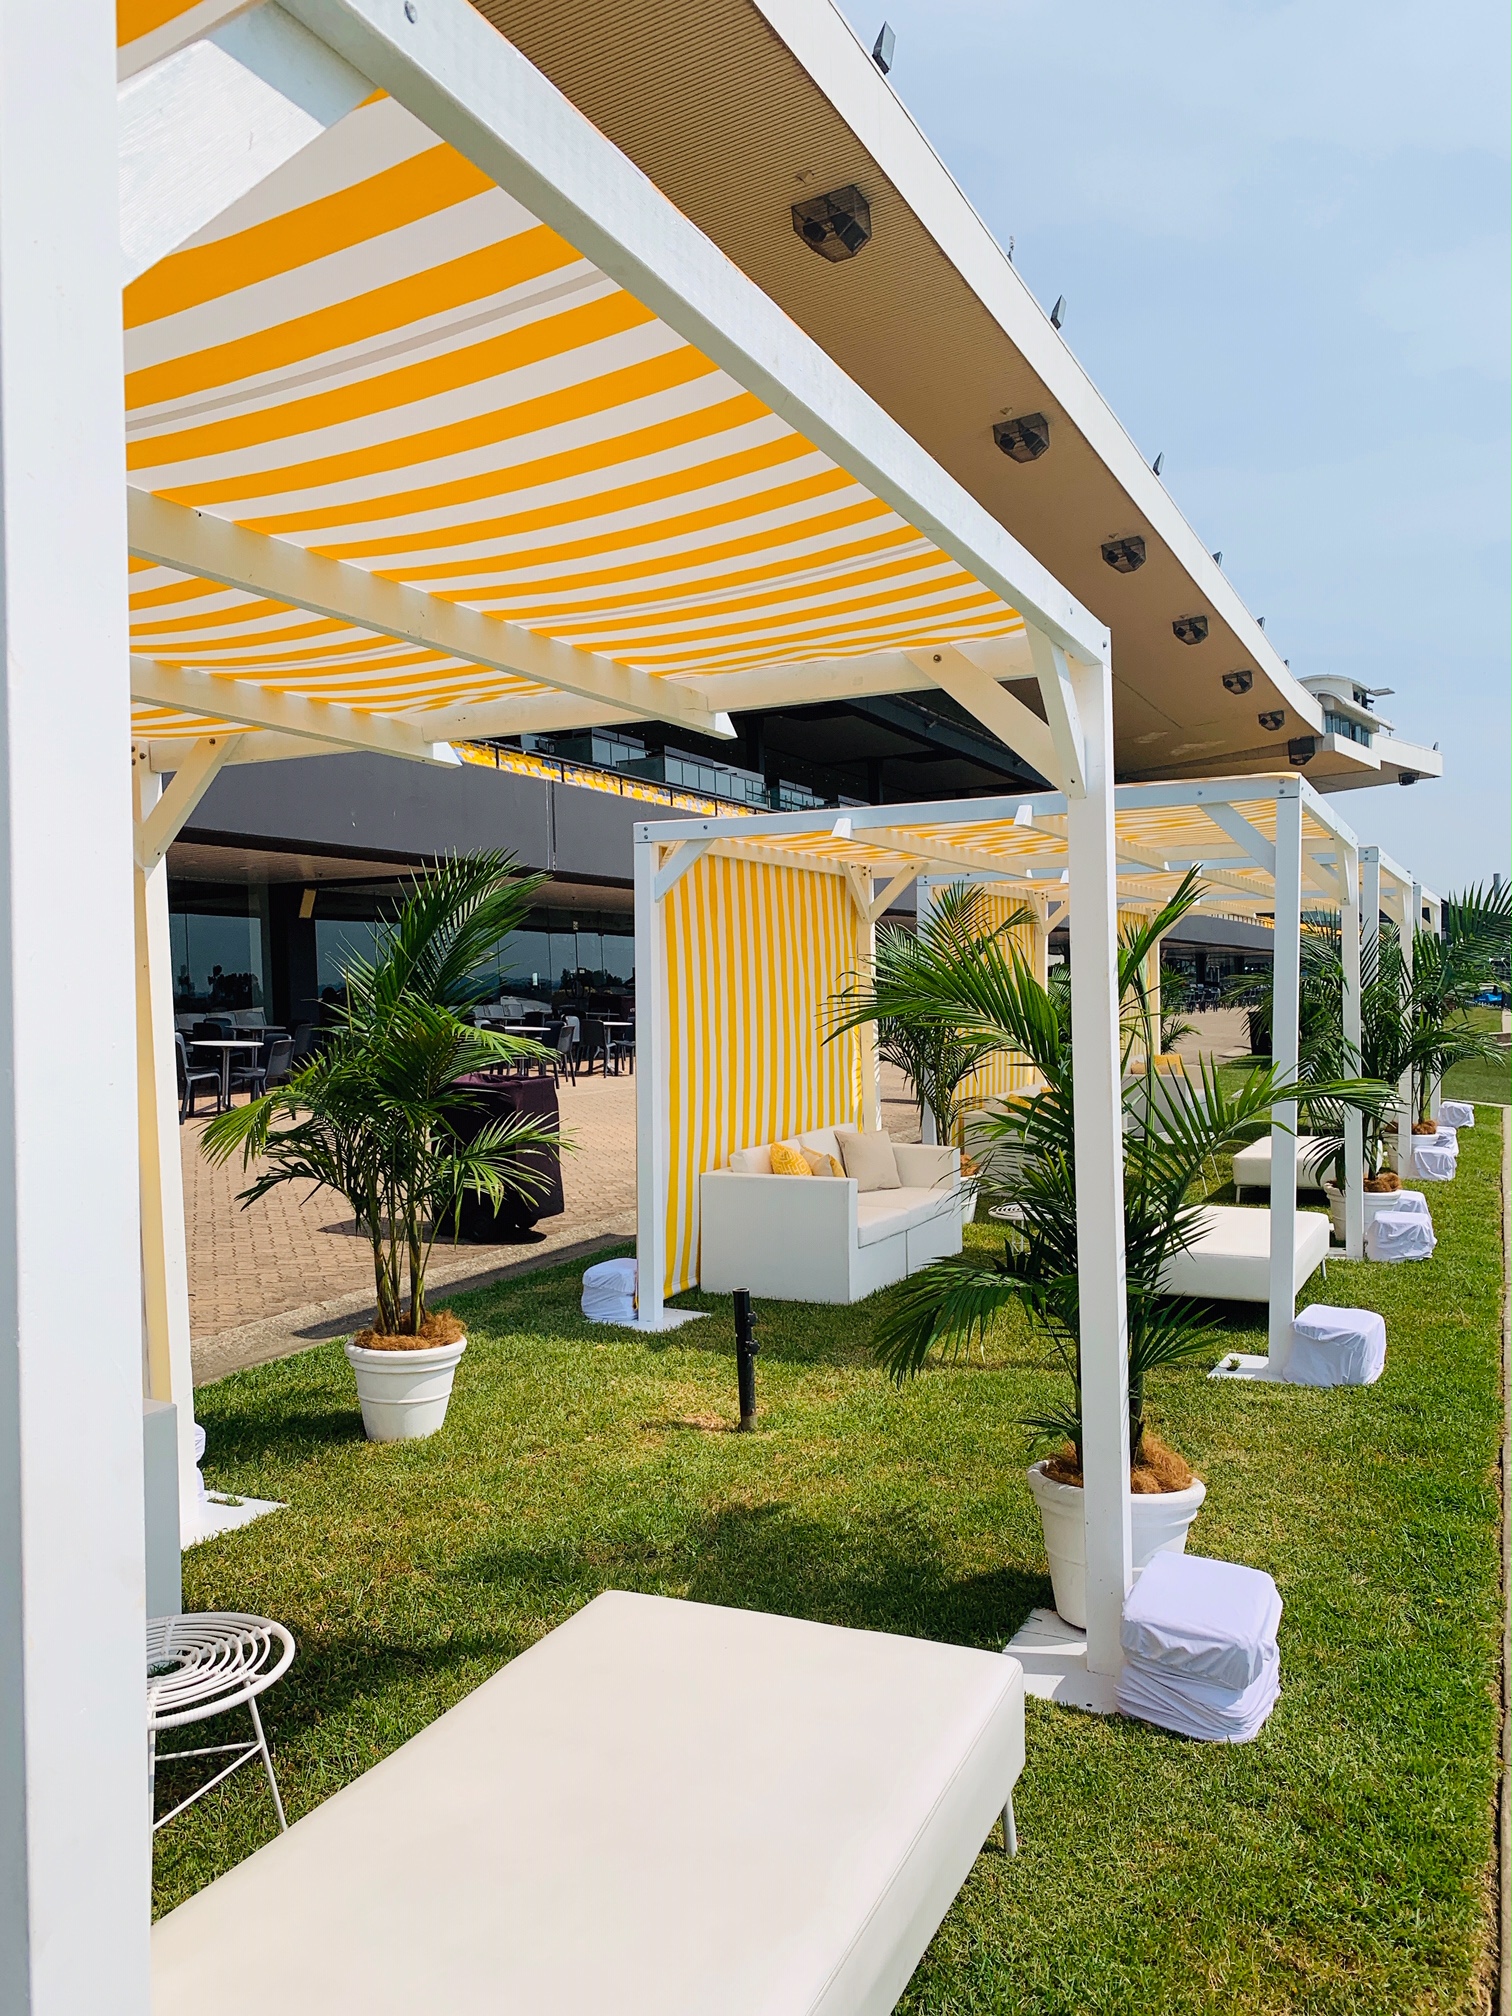 sun control-Docril Designs-Melbourne Cup activation by Outdoor Blinds & Awnings-01 copy